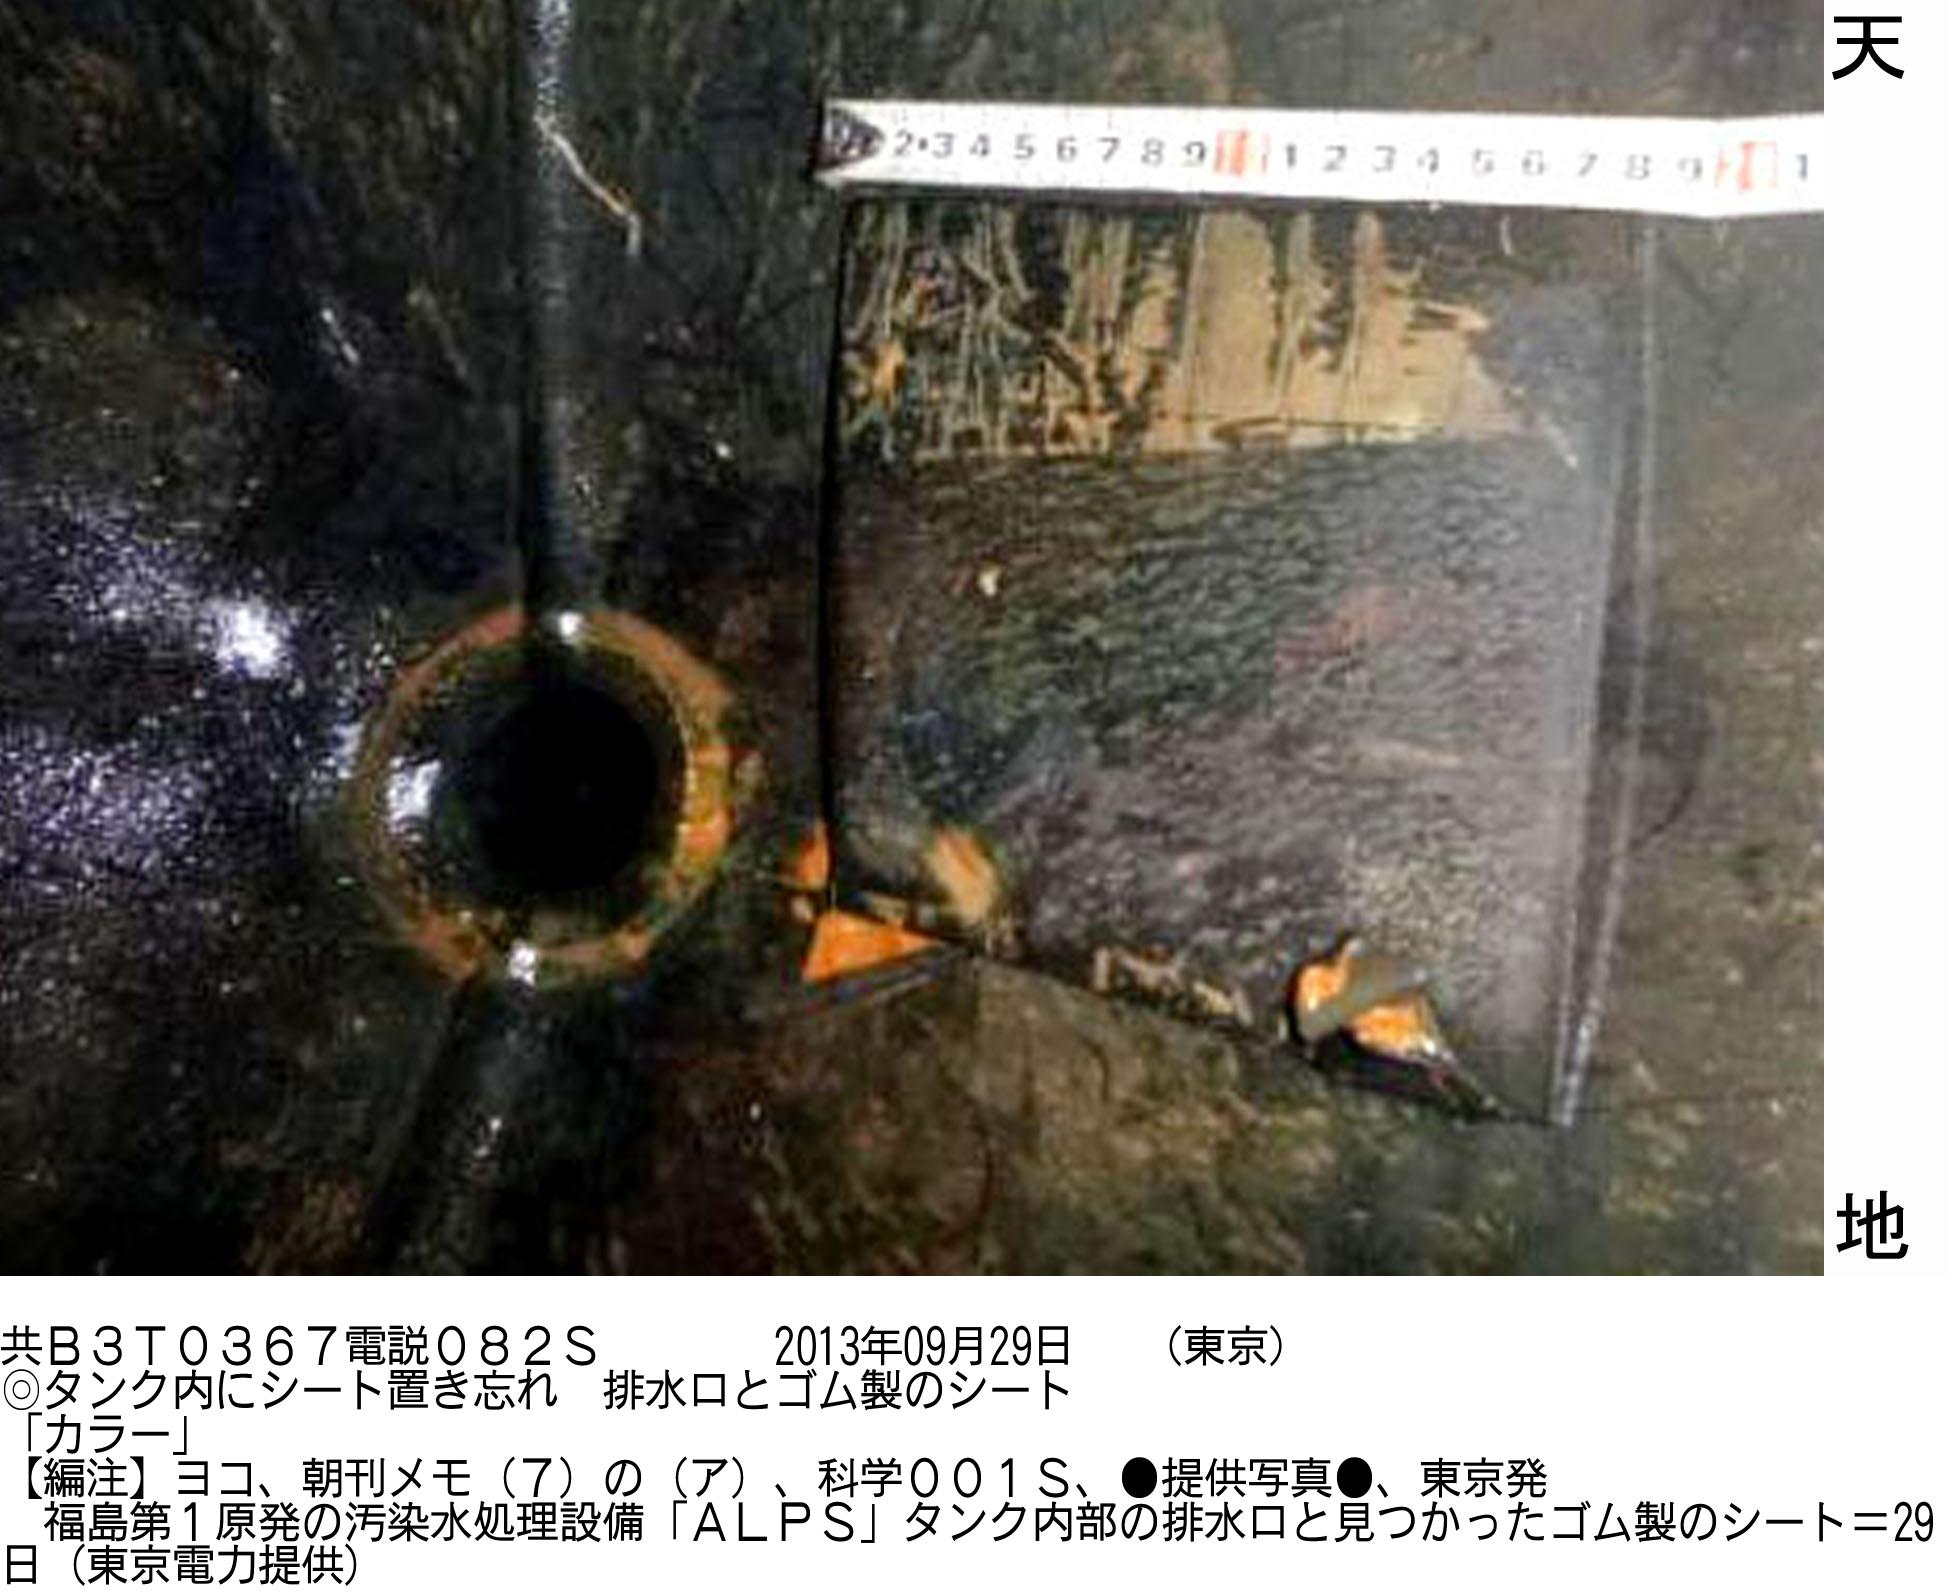 Latest slip-up: A rubber mat sits next to a drain pipe in a tank in the ALPS water decontamination system at the crippled Fukushima No. 1 nuclear plant Sunday.  | TEPCO/KYODO